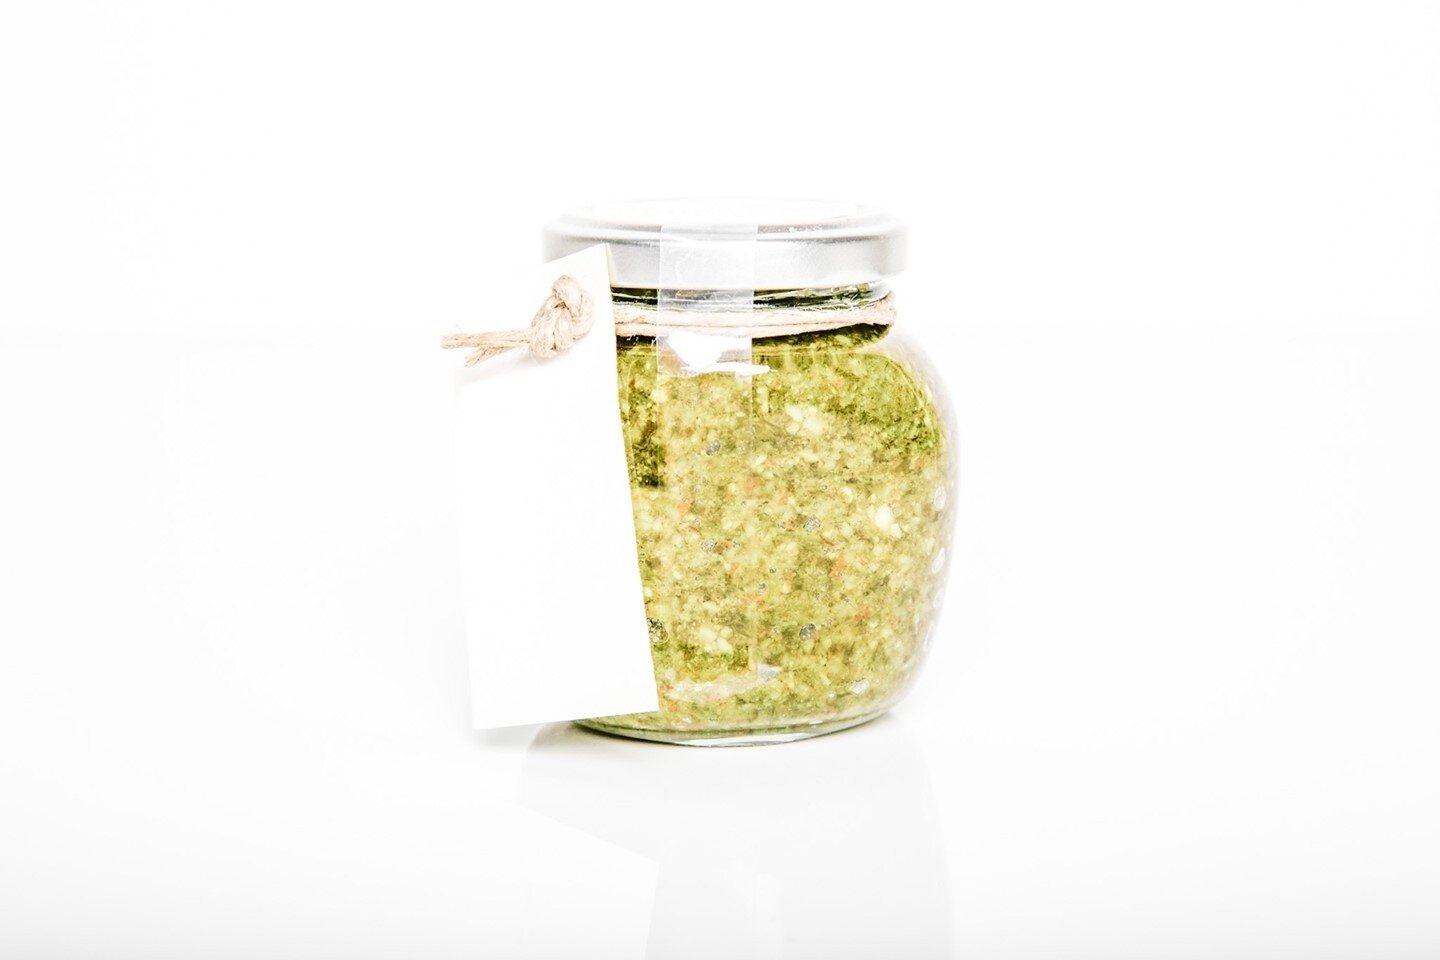 Our absolute favorite #vegan pesto⁠
⁠
So simple, just put everything in a food processor, press the button and Voila! Perfect to put on your pasta or pizza or anything else you like!⁠
⁠
6 ingredients⁠
⁠
3 cups Basil⁠
2 Garlic cloves, large⁠
1 Lemon, 